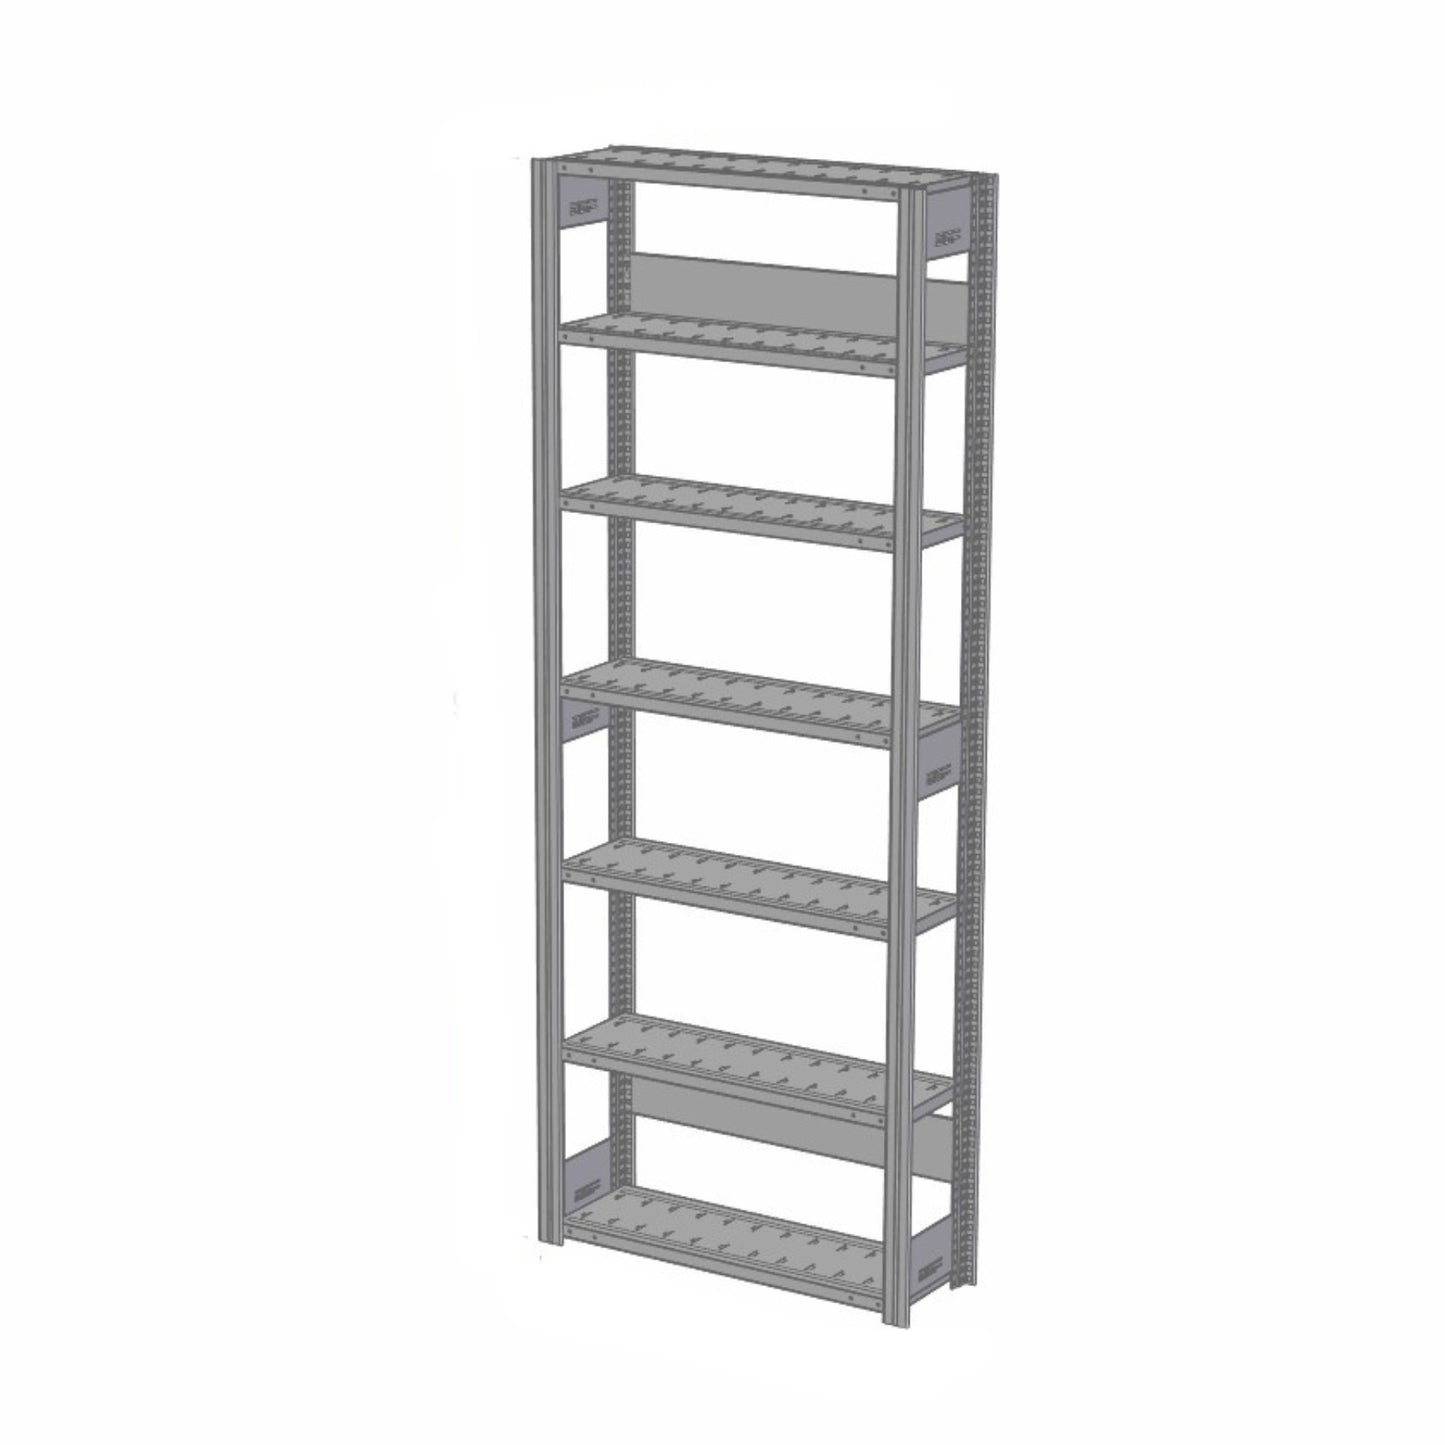 Shelving system 99 height x 36 width x 12 depth | Option: Open / Closed